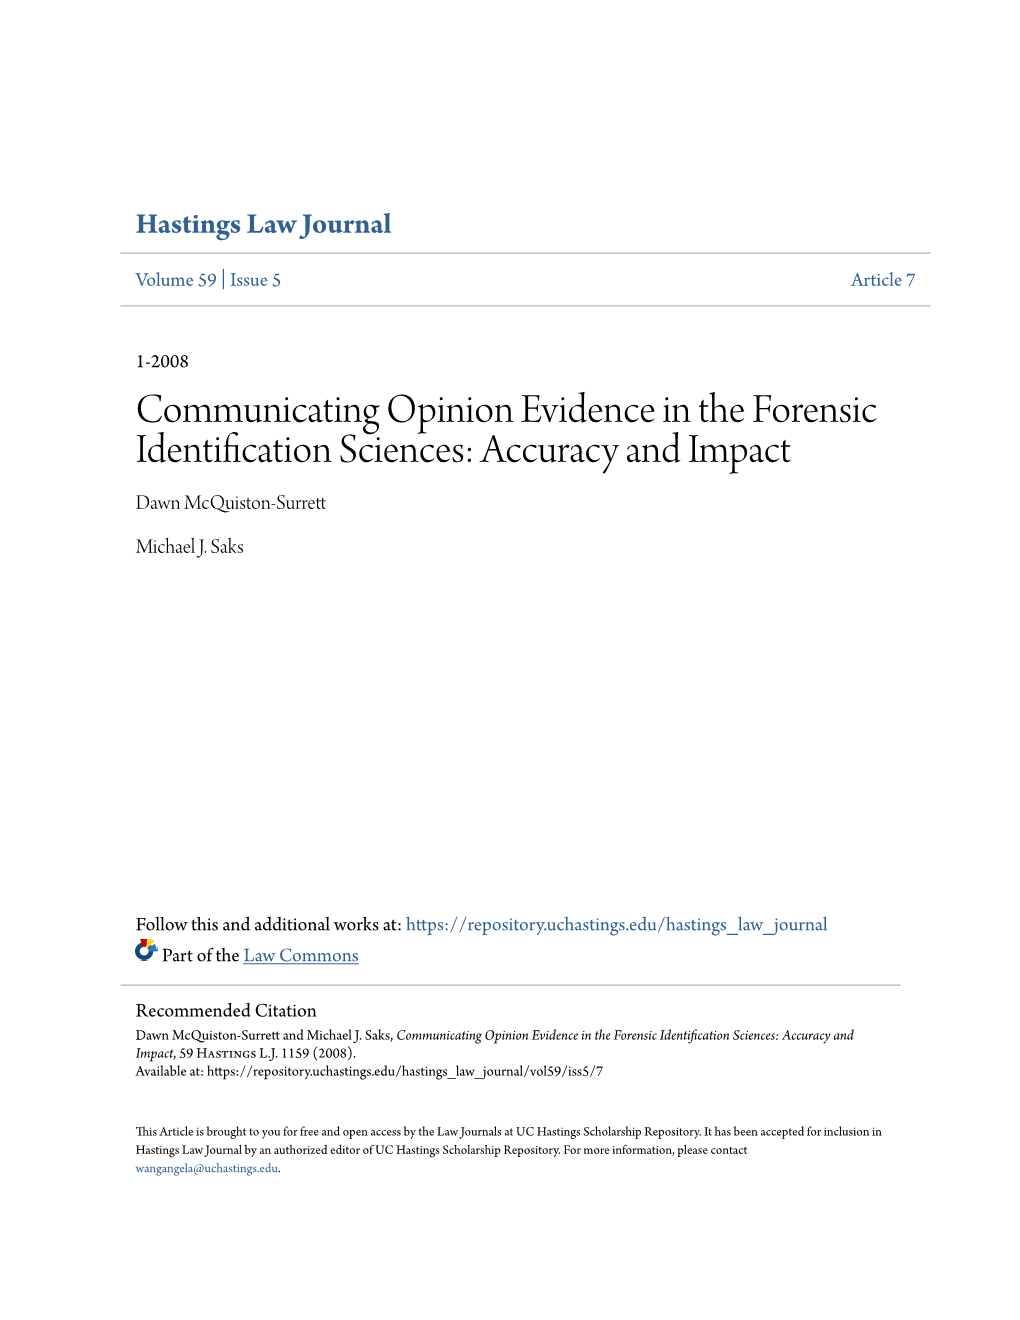 Communicating Opinion Evidence in the Forensic Identification Sciences: Accuracy and Impact Dawn Mcquiston-Surrett